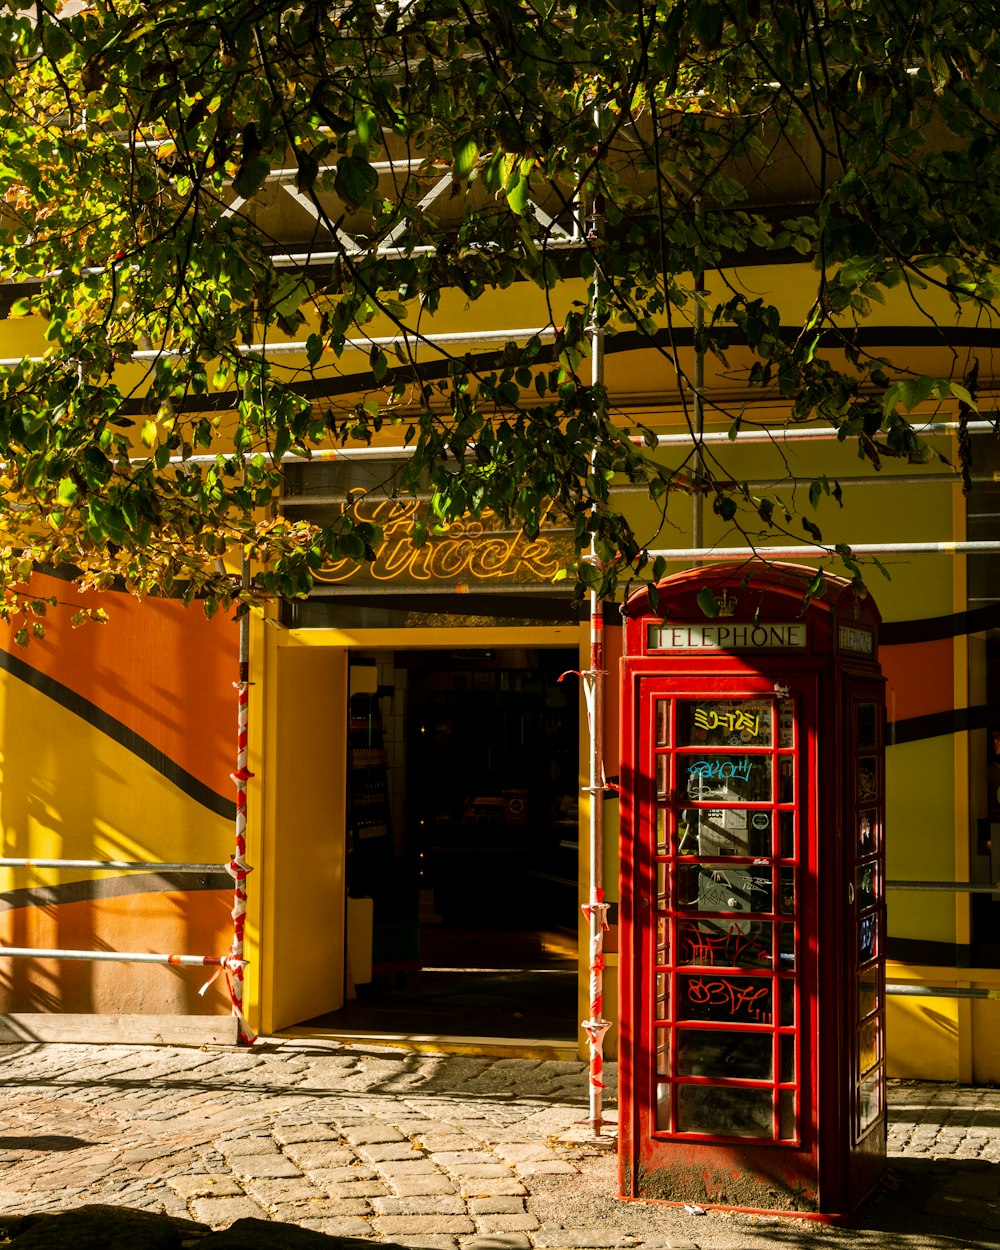 a red phone booth in front of a yellow building